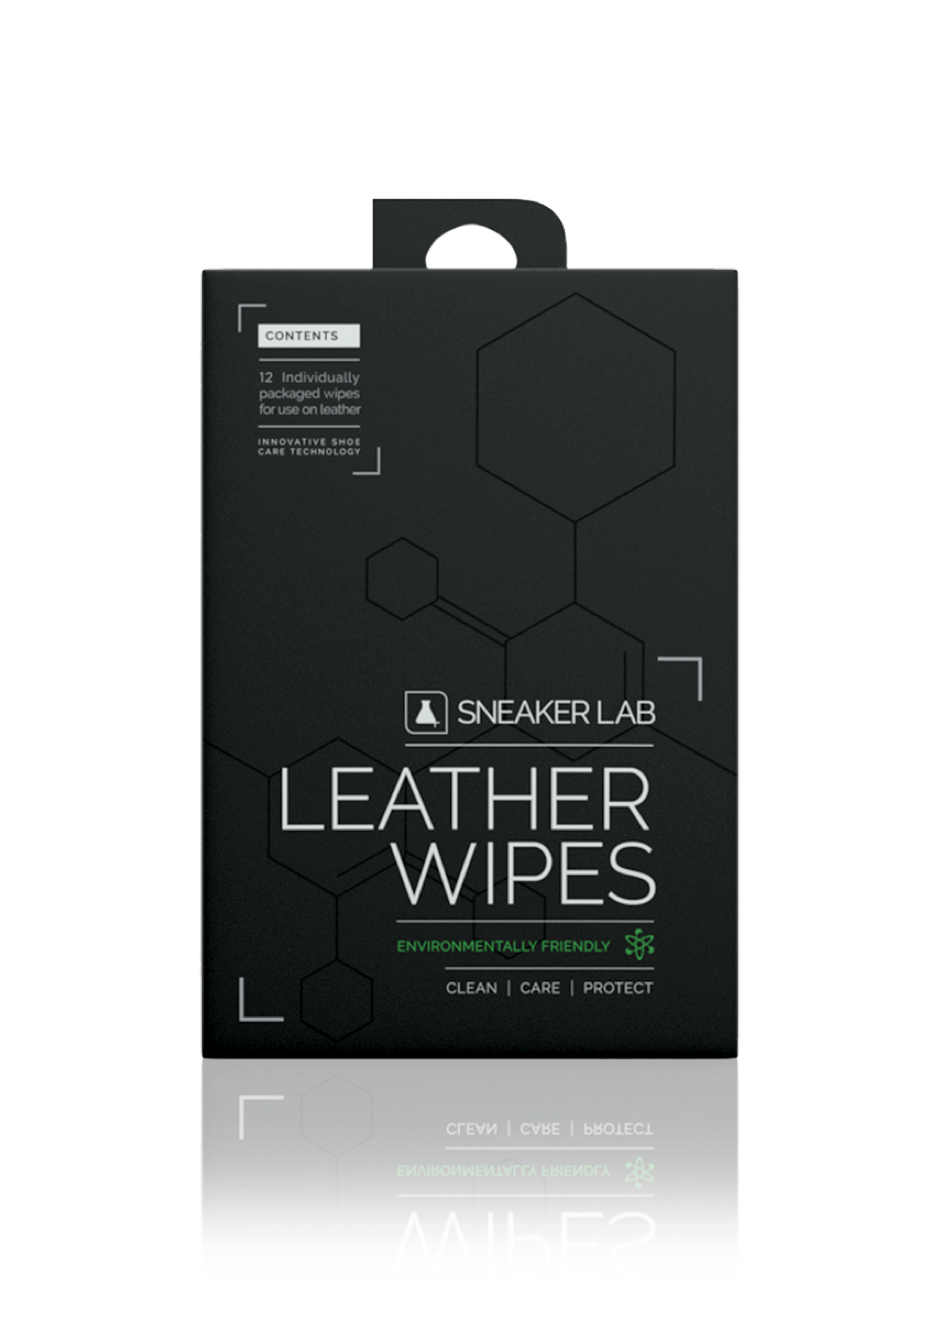 Sneaker LAB Leather Wipes